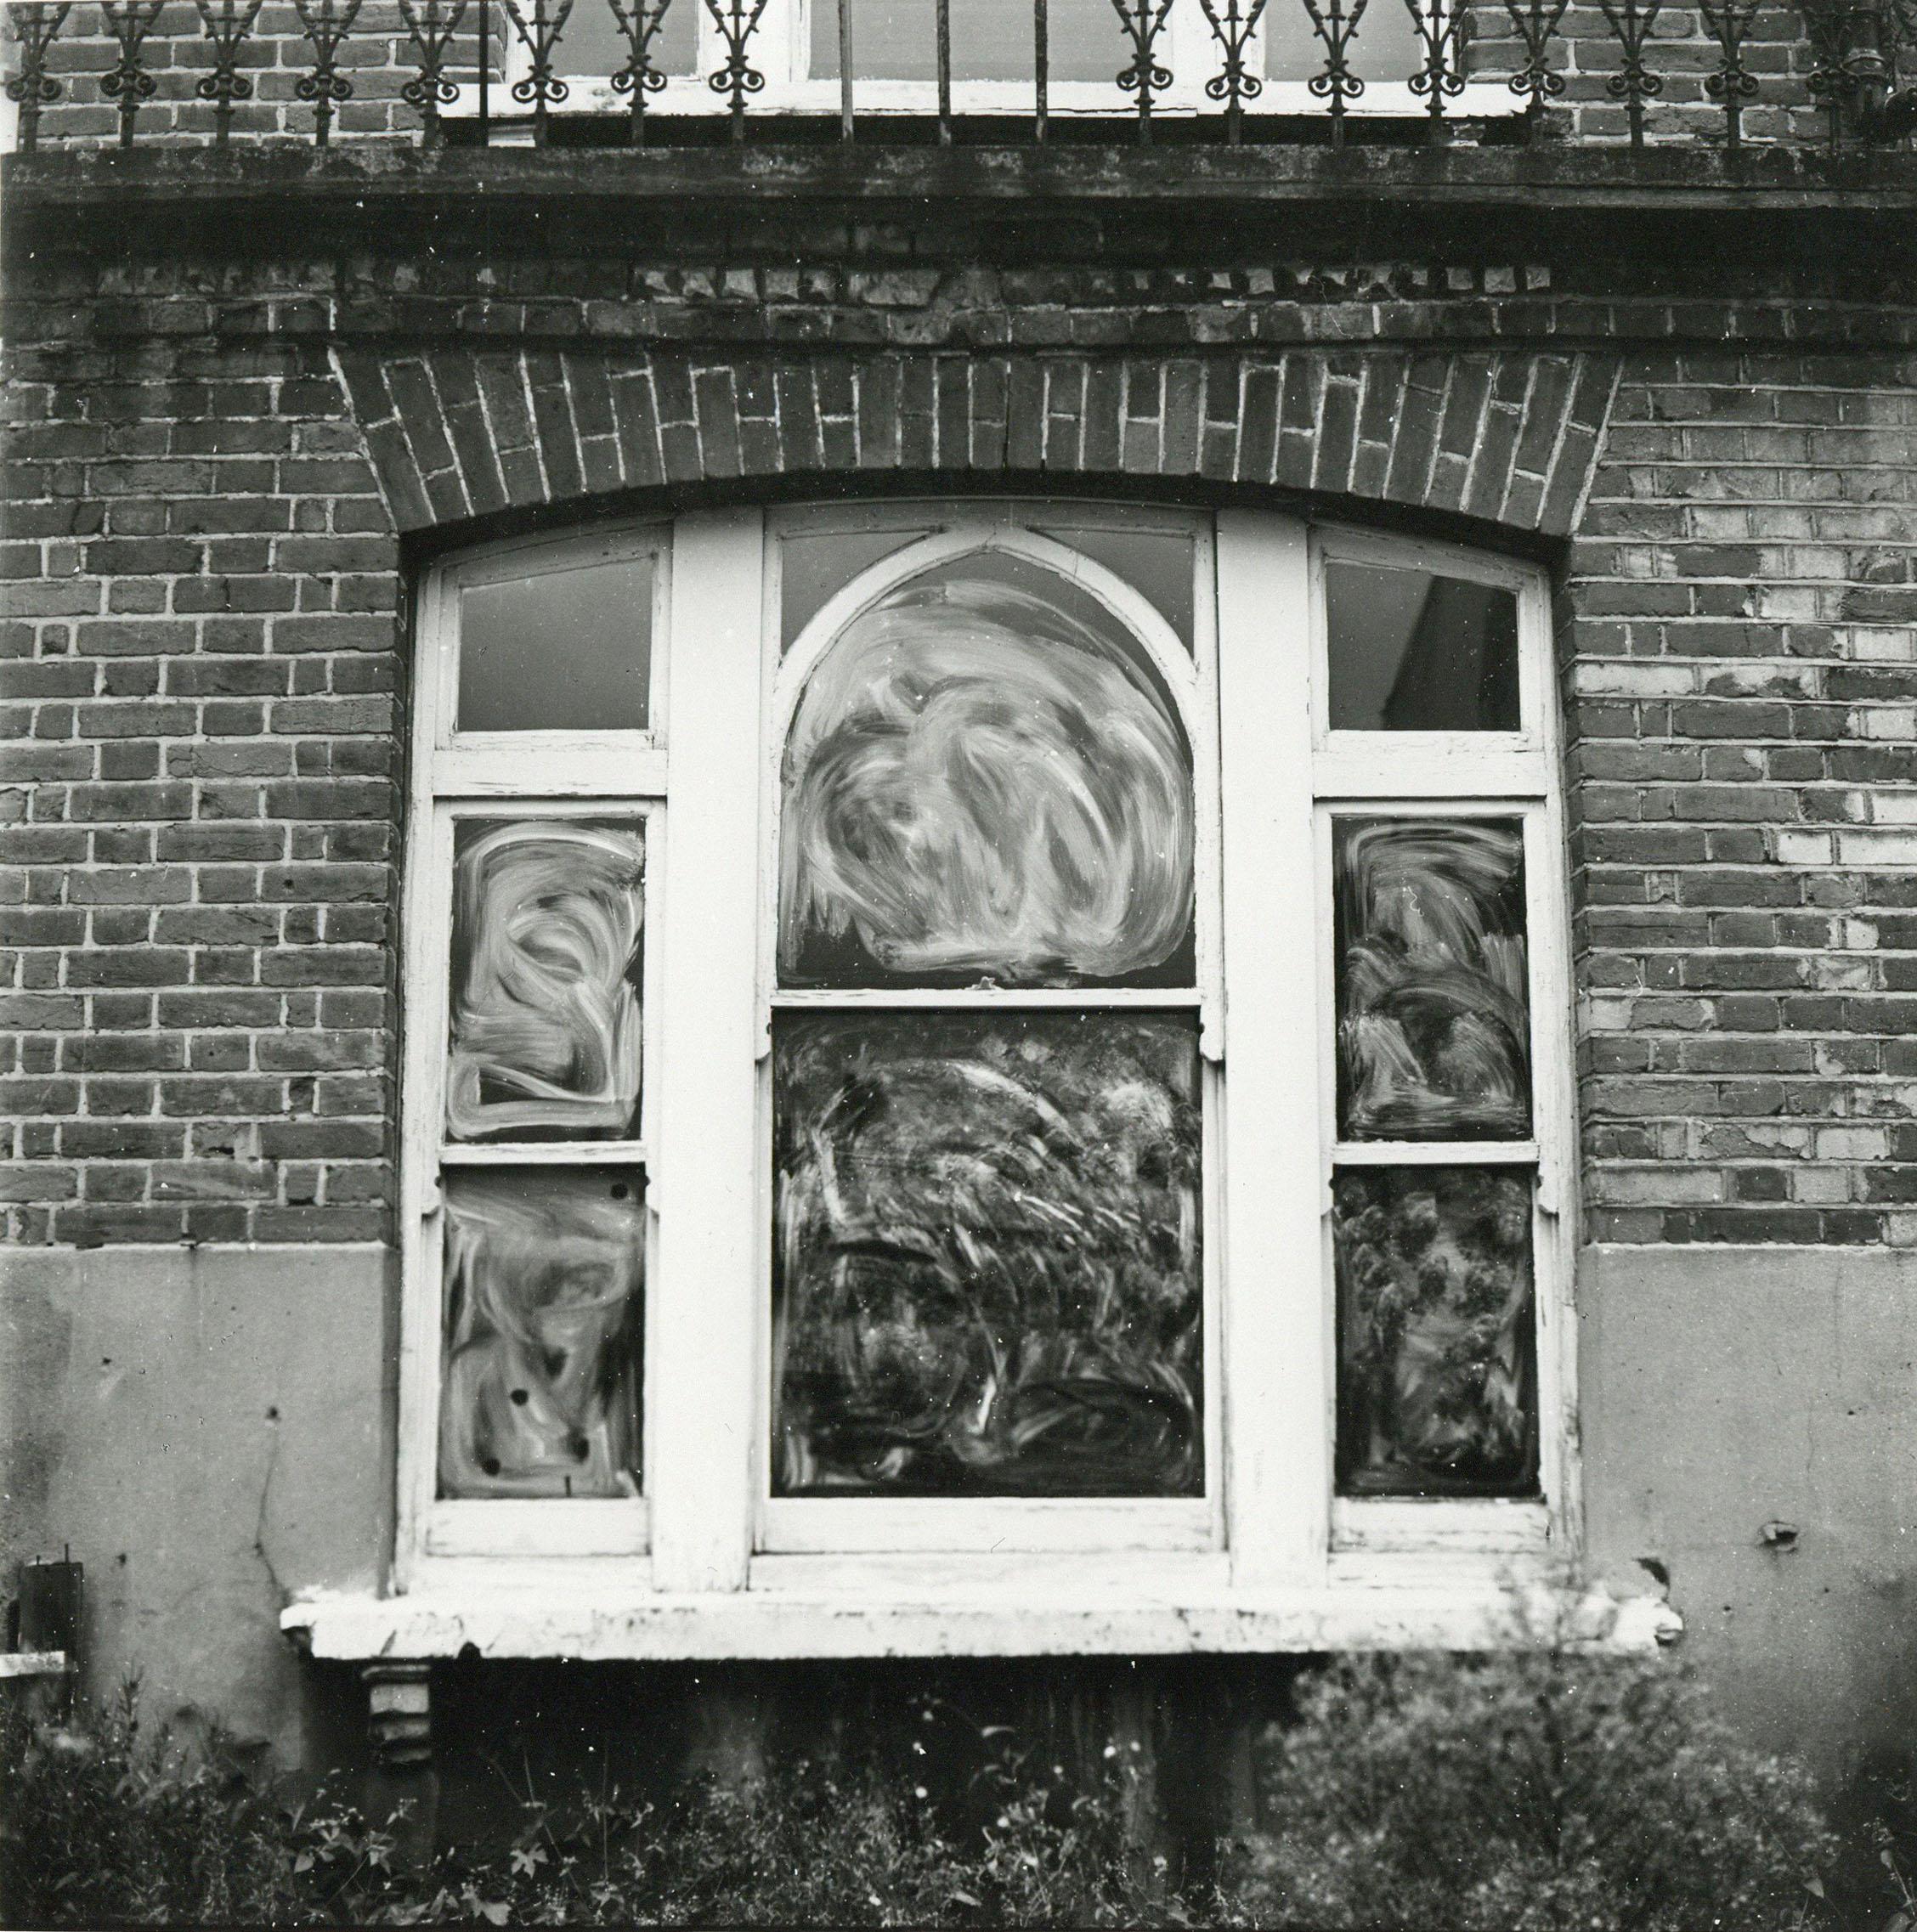 Rosemary Ellis
Windows XI
Original photography for Windows in the Outlooks and Insights series published by Bodley Head, composed by Rosemary & Charlotte Ellis.
Gelatin Silver Print
13x13cm

Rosemary Ellis was well known as a talented photographer,